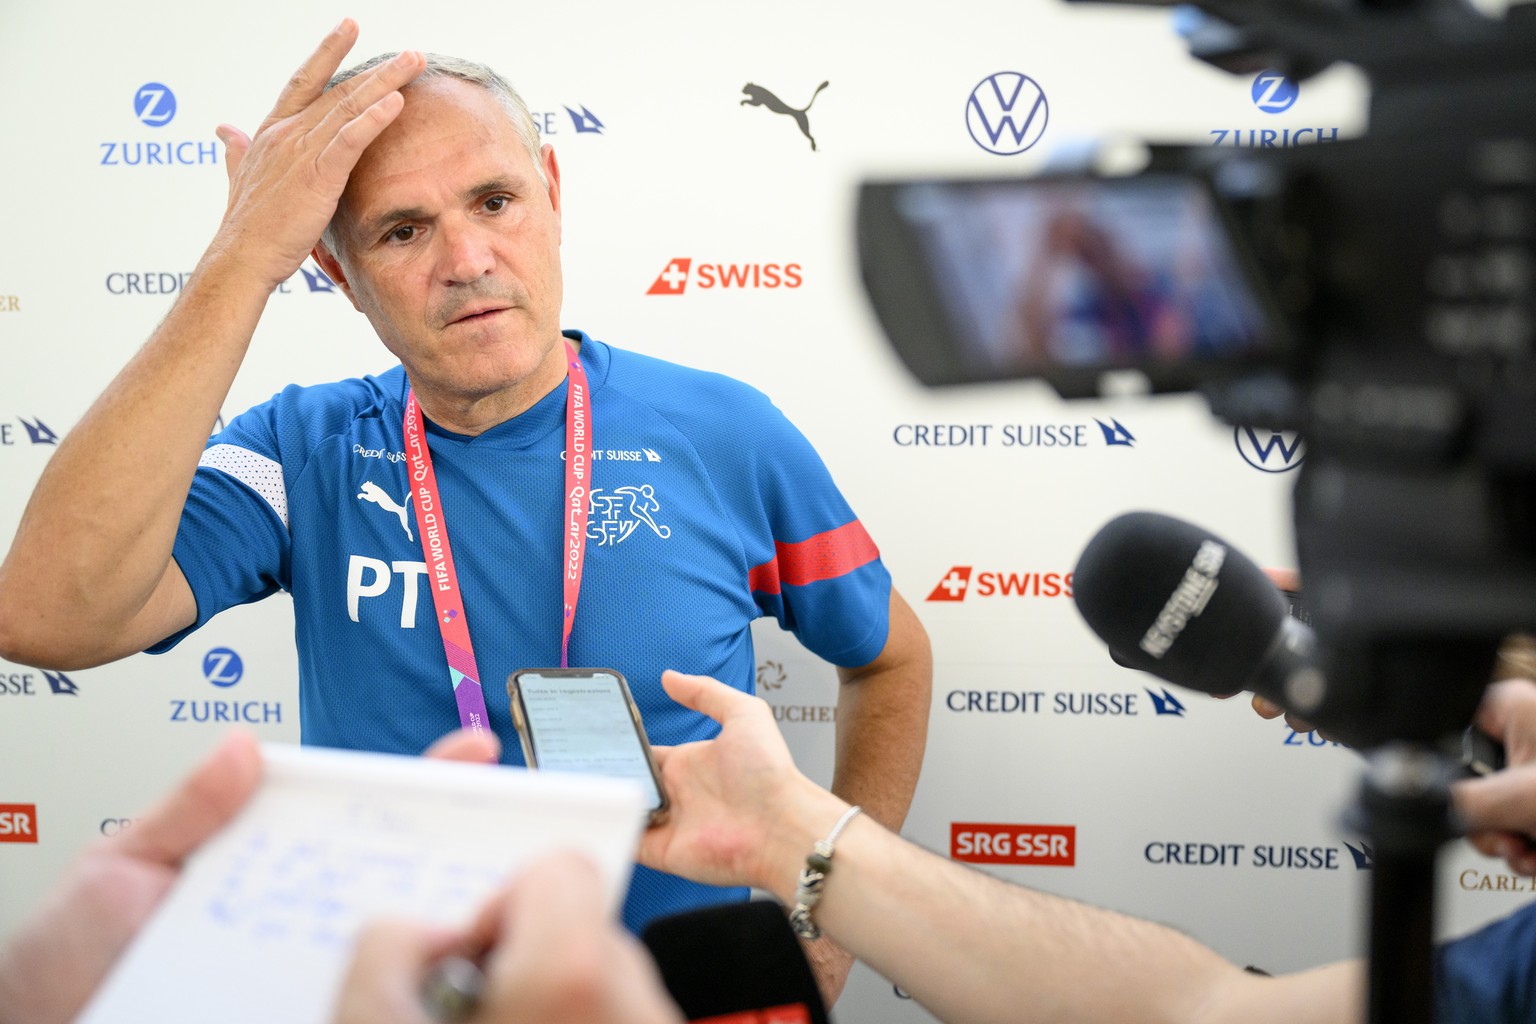 Switzerland's national soccer teams director Pierluigi Tami speaks with journalists during a mixed zone after a open training session of Swiss national soccer team in preparation for the FIFA World Cu ...